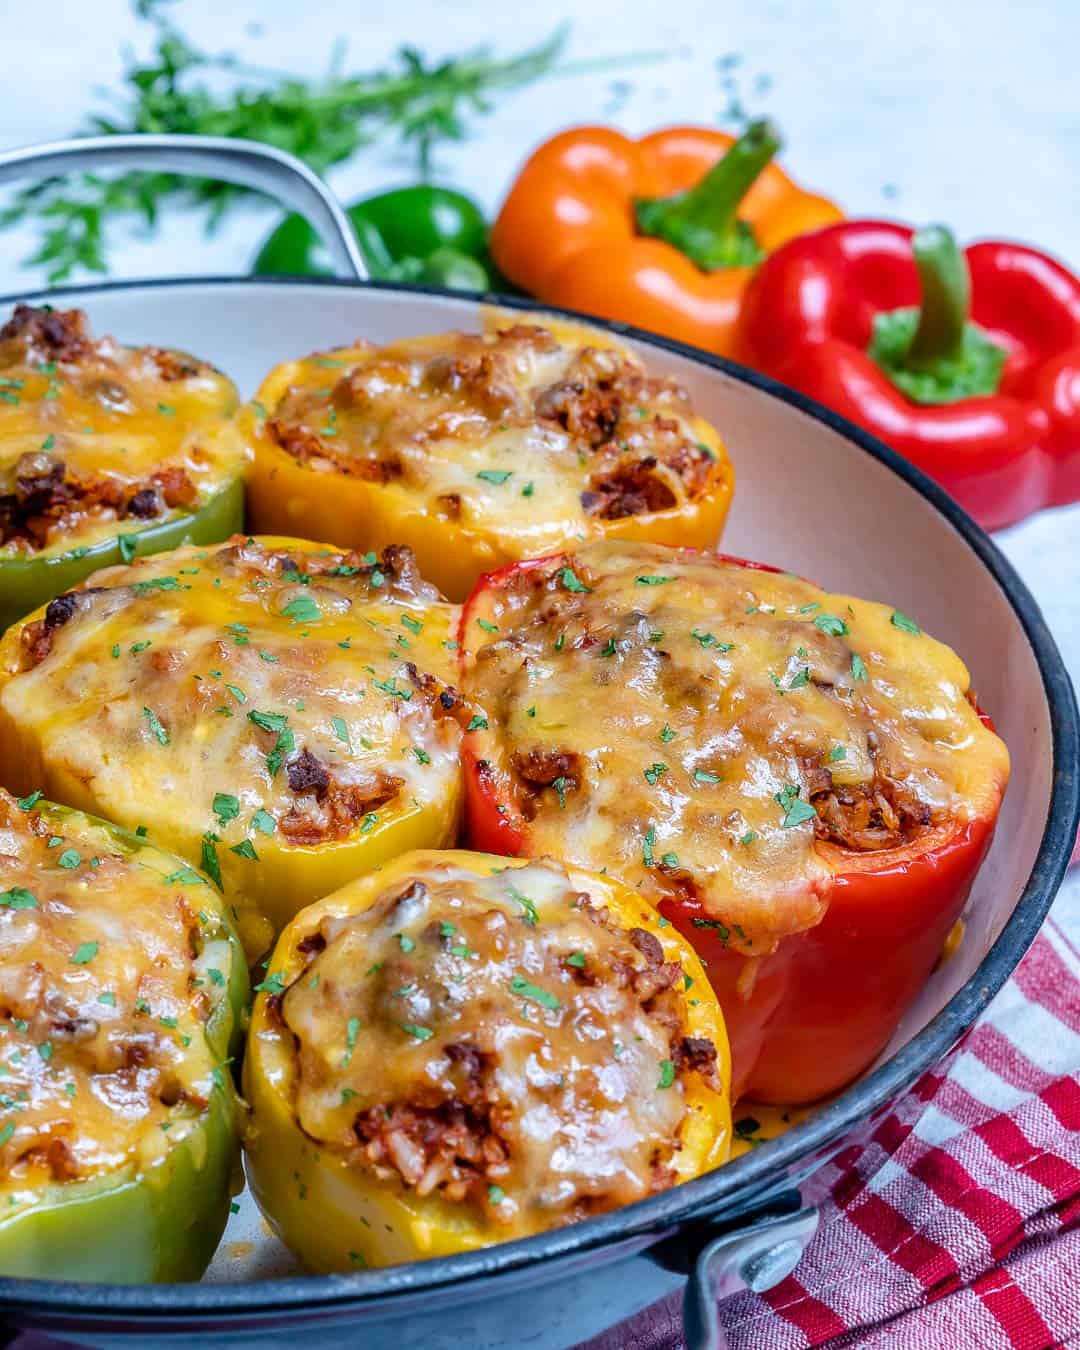 Easy Stuffed Peppers Recipe Healthy Fitness Meals,Mexican Cornbread Recipe With Jiffy